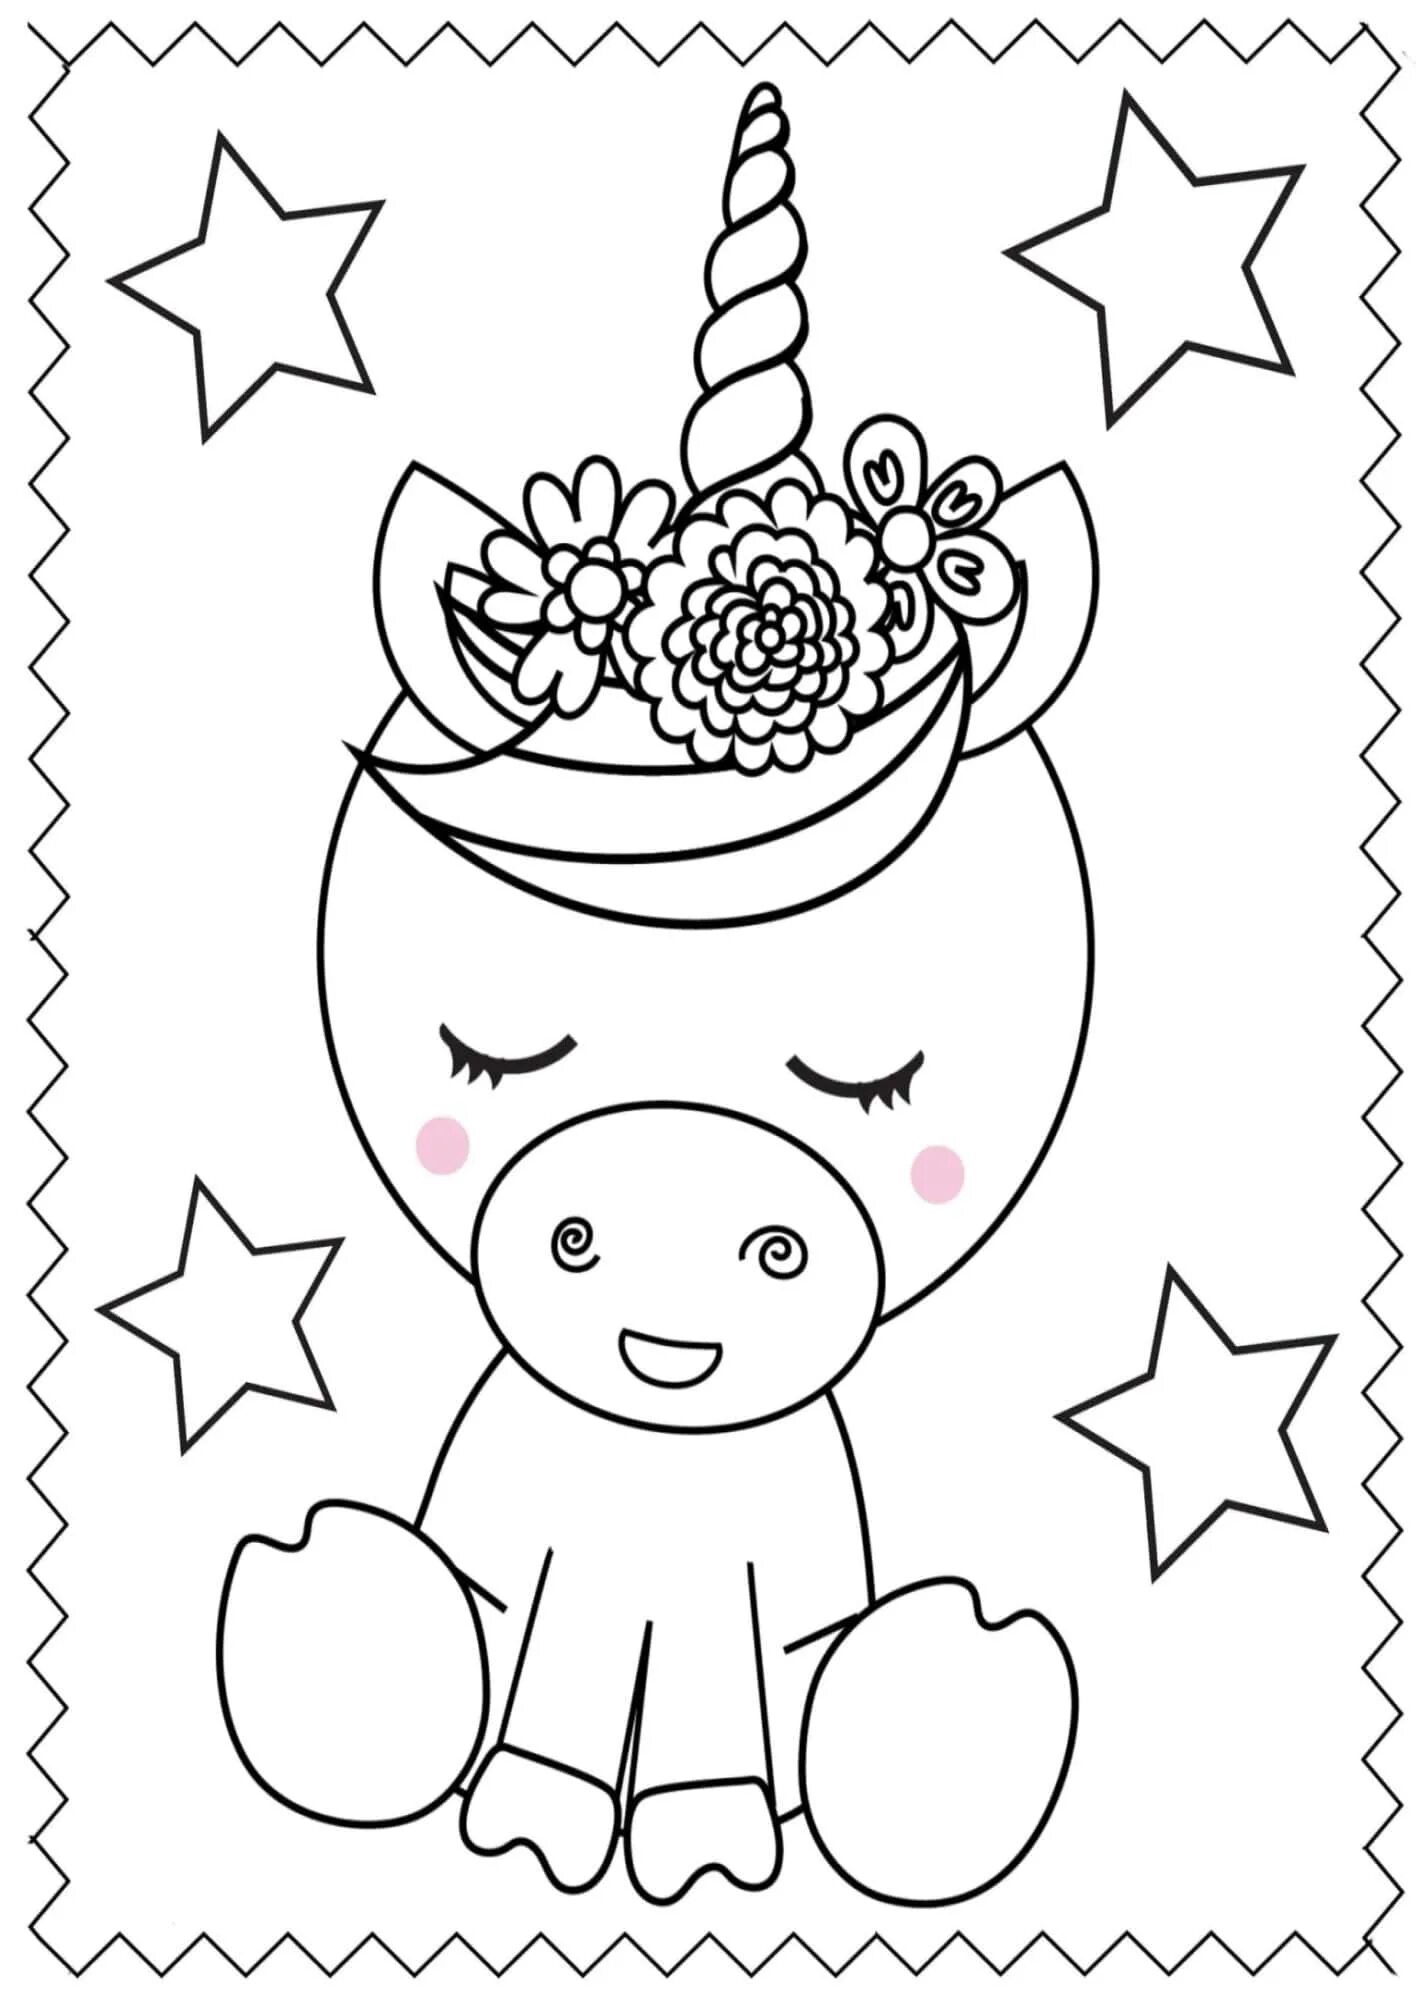 Attractive basic coloring book